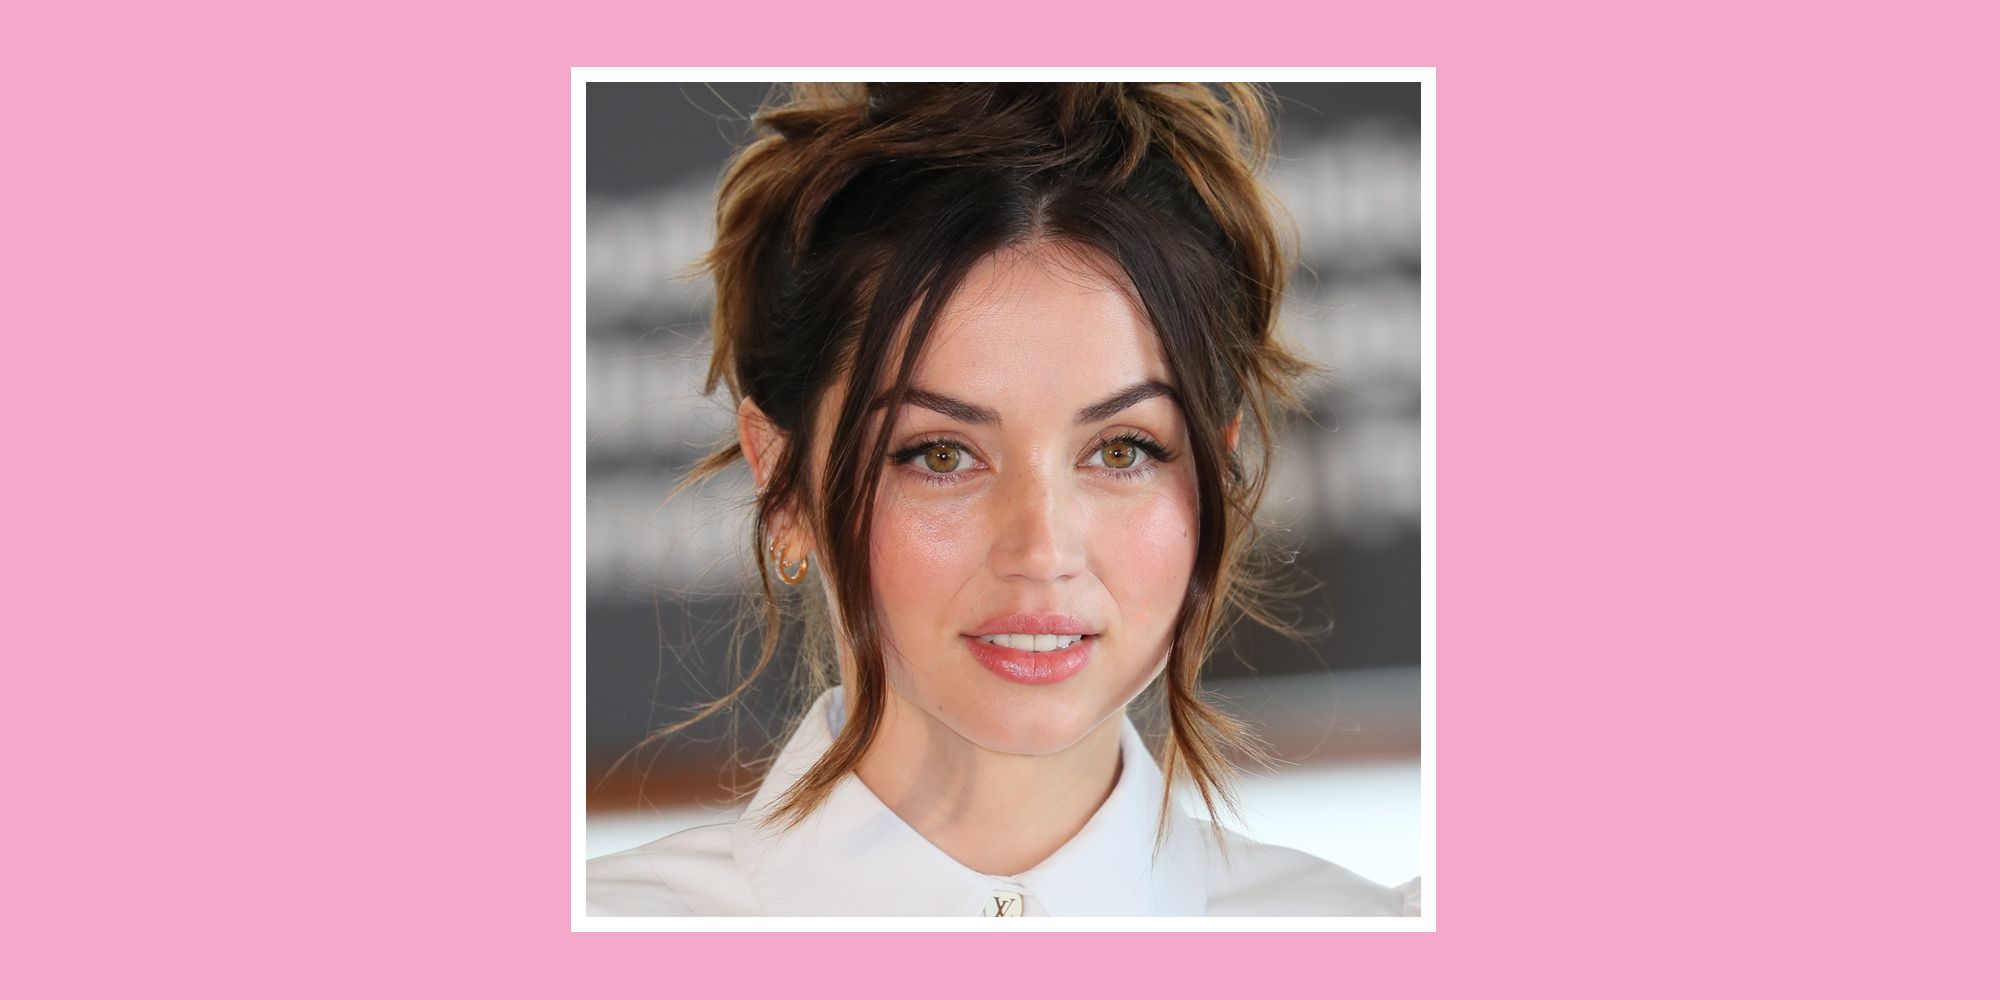 Ana de Armas, 33, On Her Favorite Skincare Products And More pic